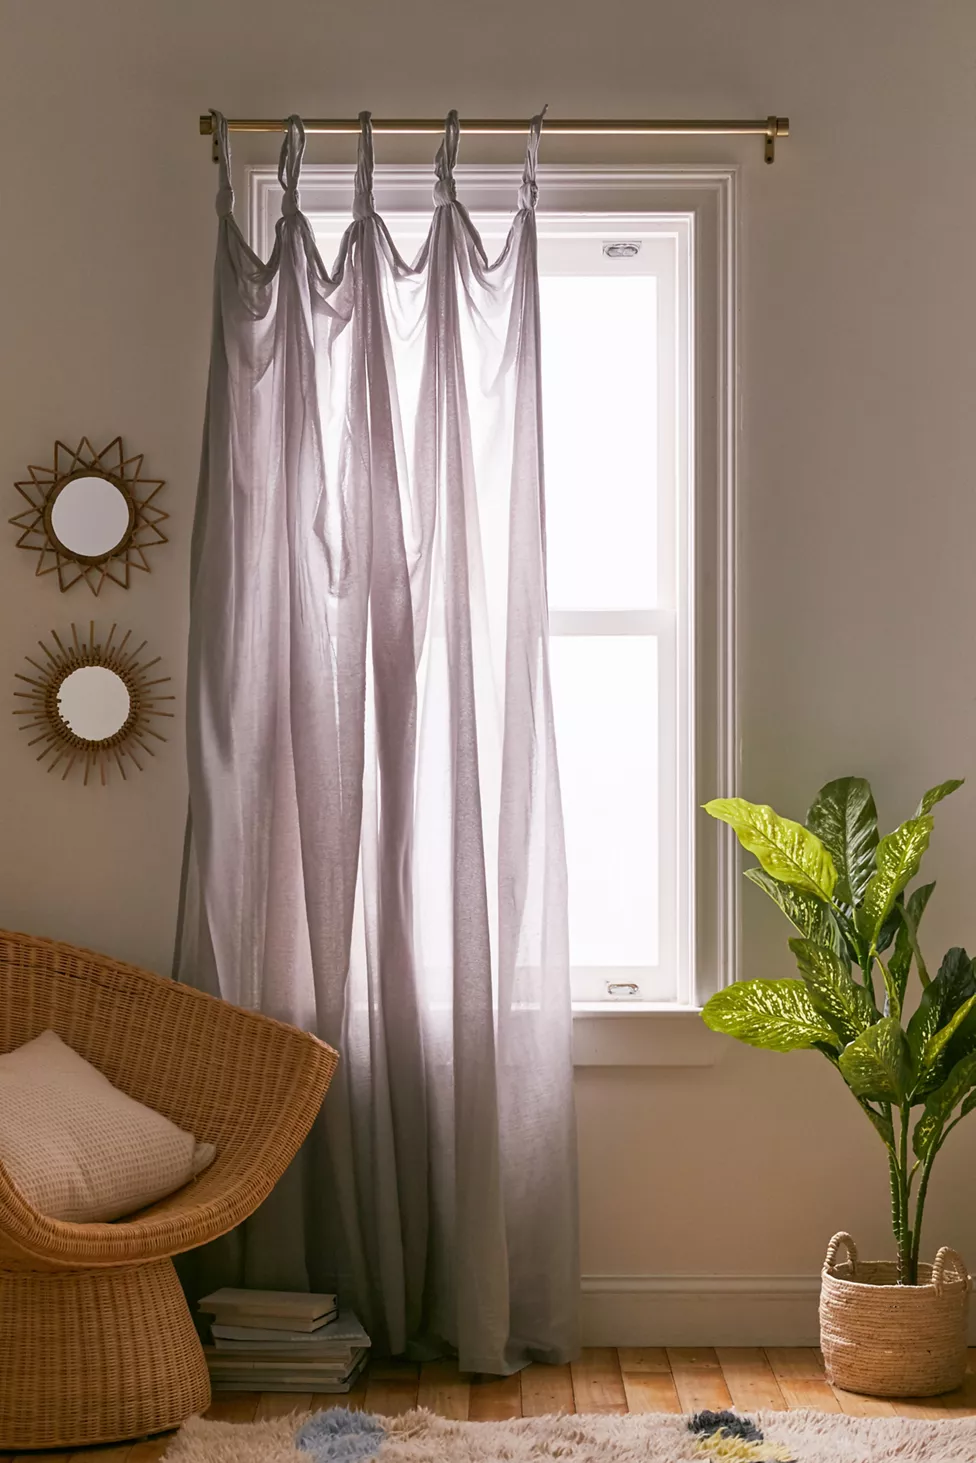 Get a Knotted Cotton Curtain in a Pastel Tone